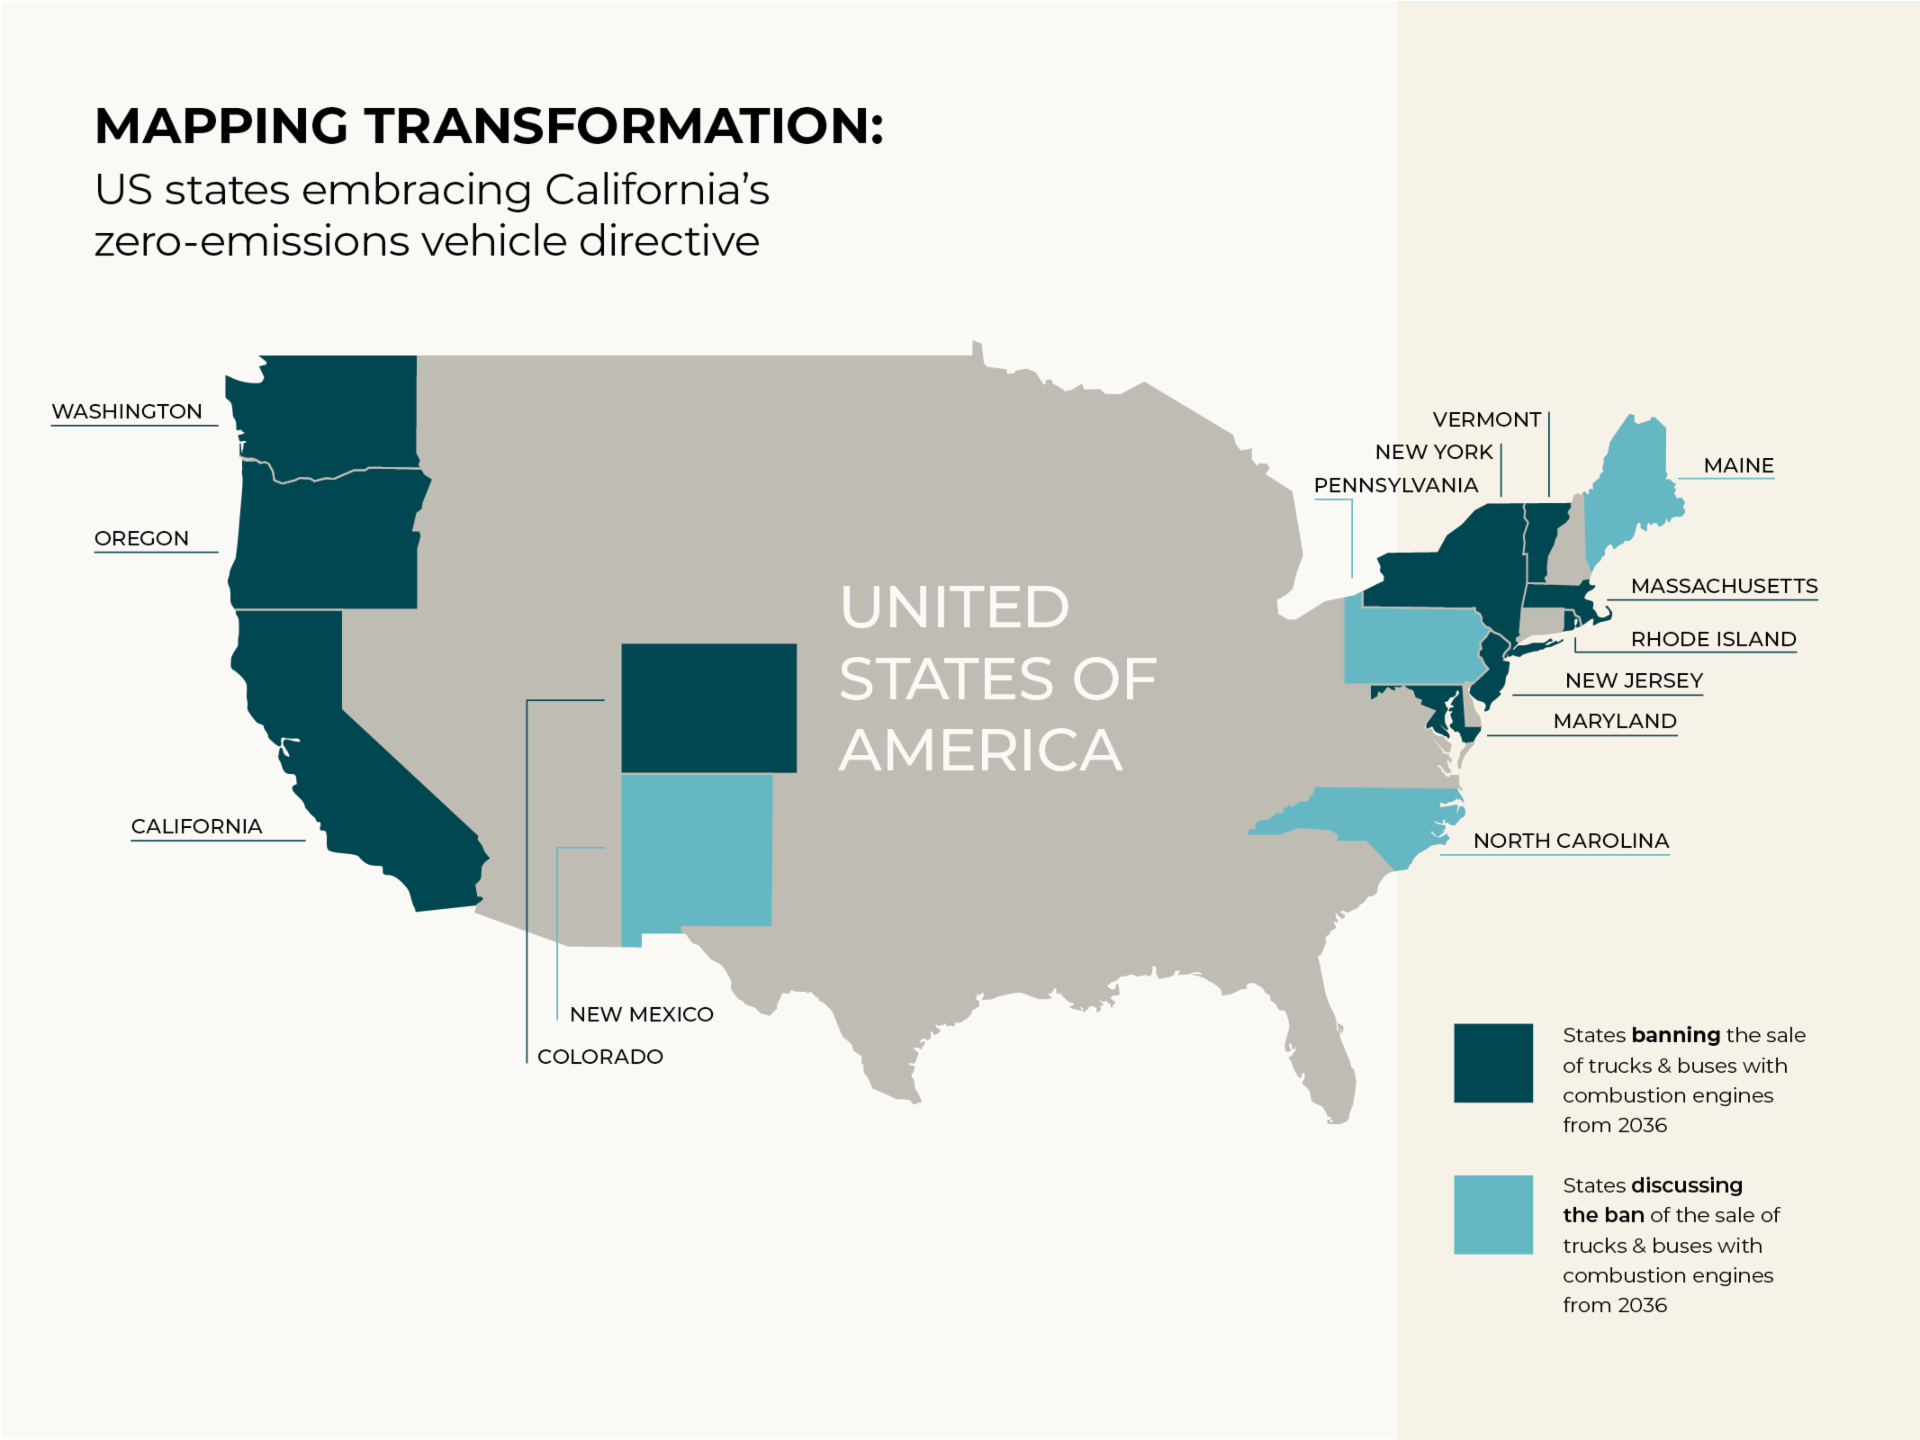 An overview of US states that are following California's zero-emissions vehicle directive